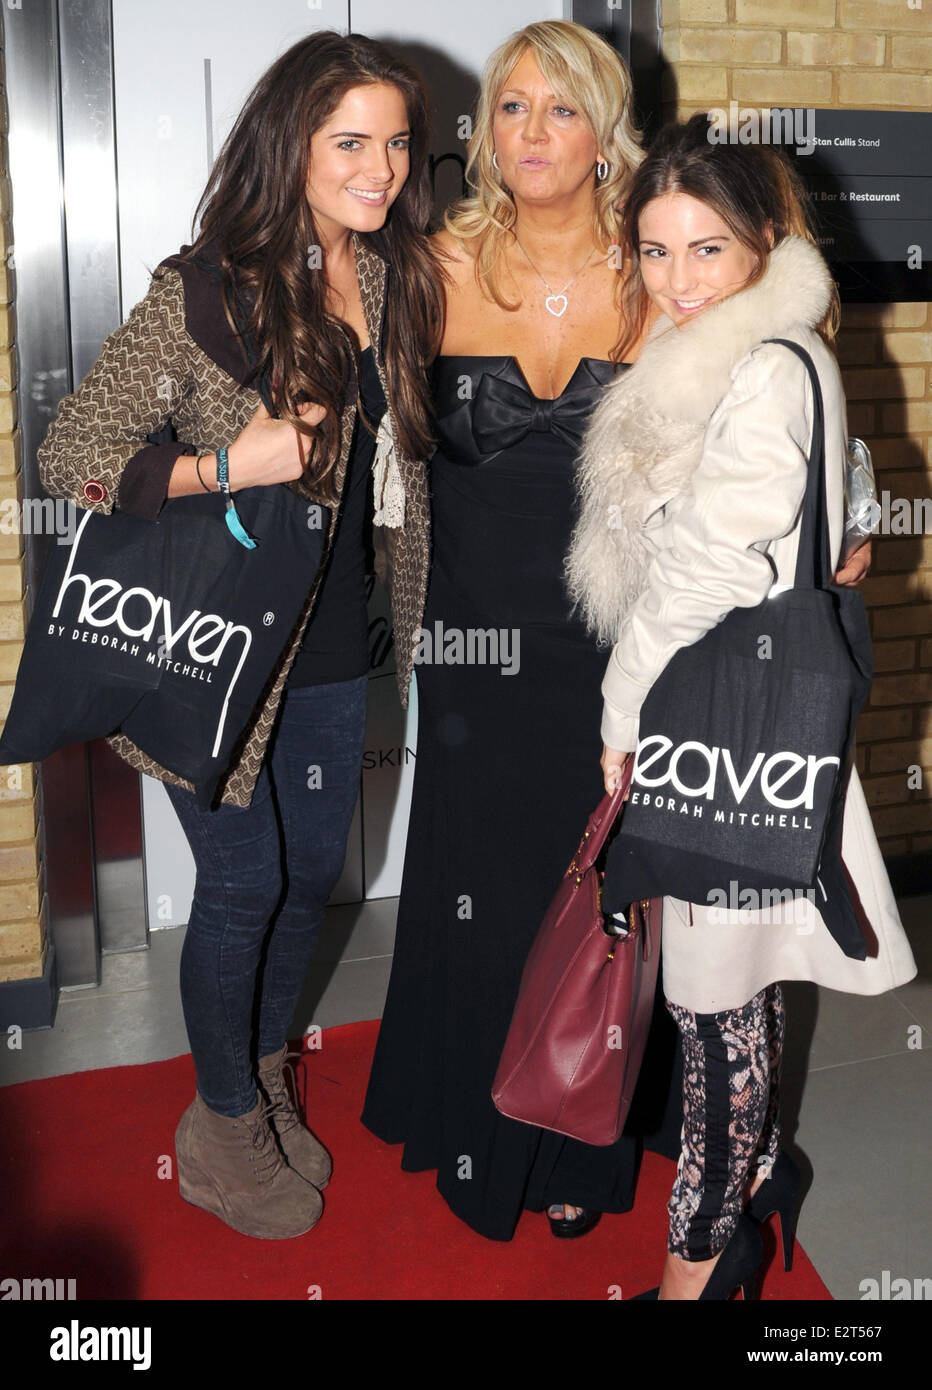 Heaven Health & Beauty launch party at the WV1 Bar & Grill at the Molineux Stadium  Featuring: Alexandra Felstead,Deborah Mitchell,Louise Thompson Where: Wolverhampton, United Kingdom When: 19 Feb 2013com Stock Photo